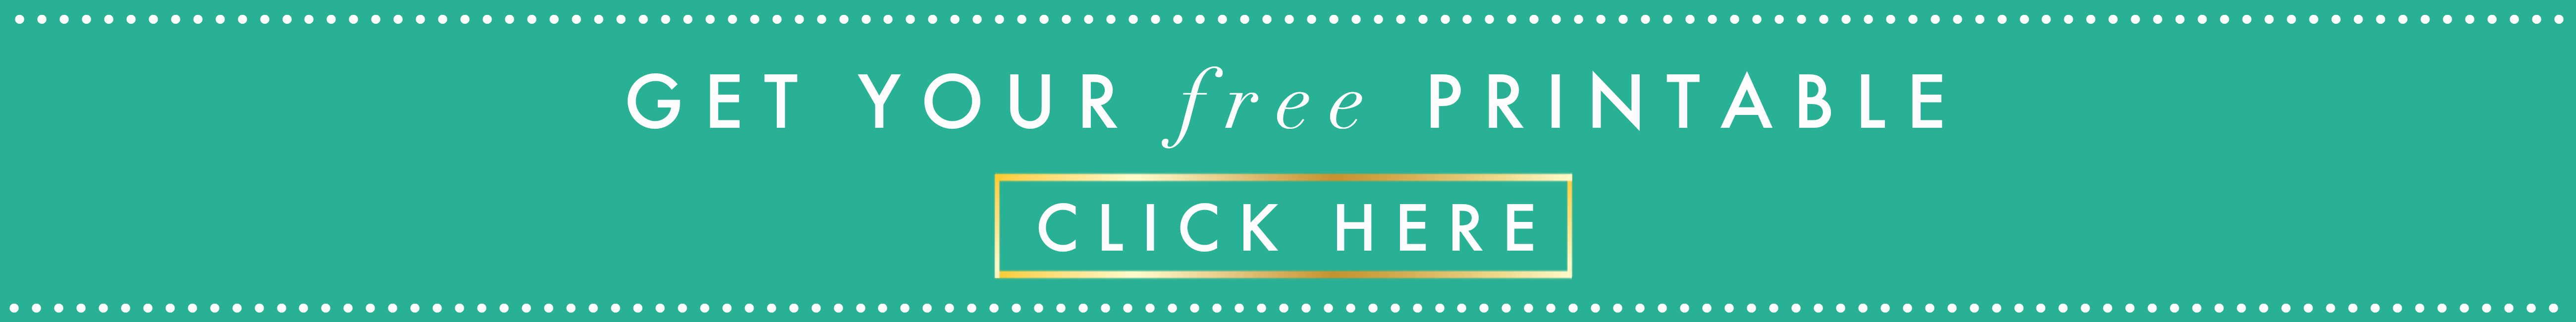 Get Your Free Printable